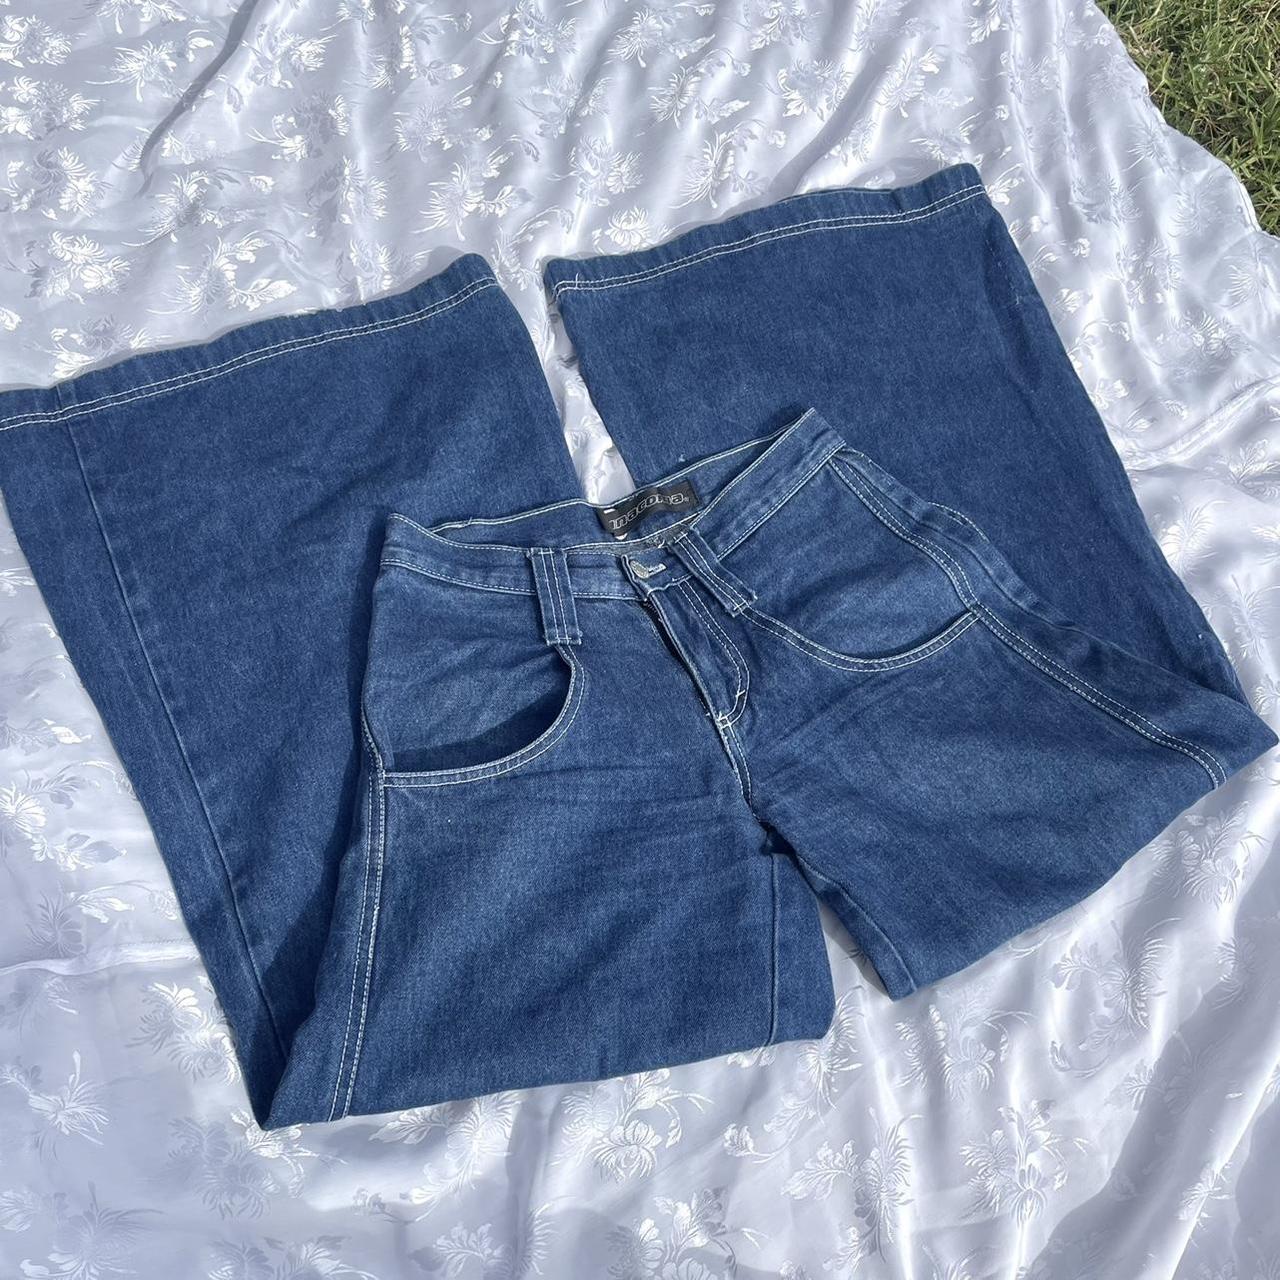 Inacoma Jeans very wide leg circa 2000s/90s “rave”... - Depop